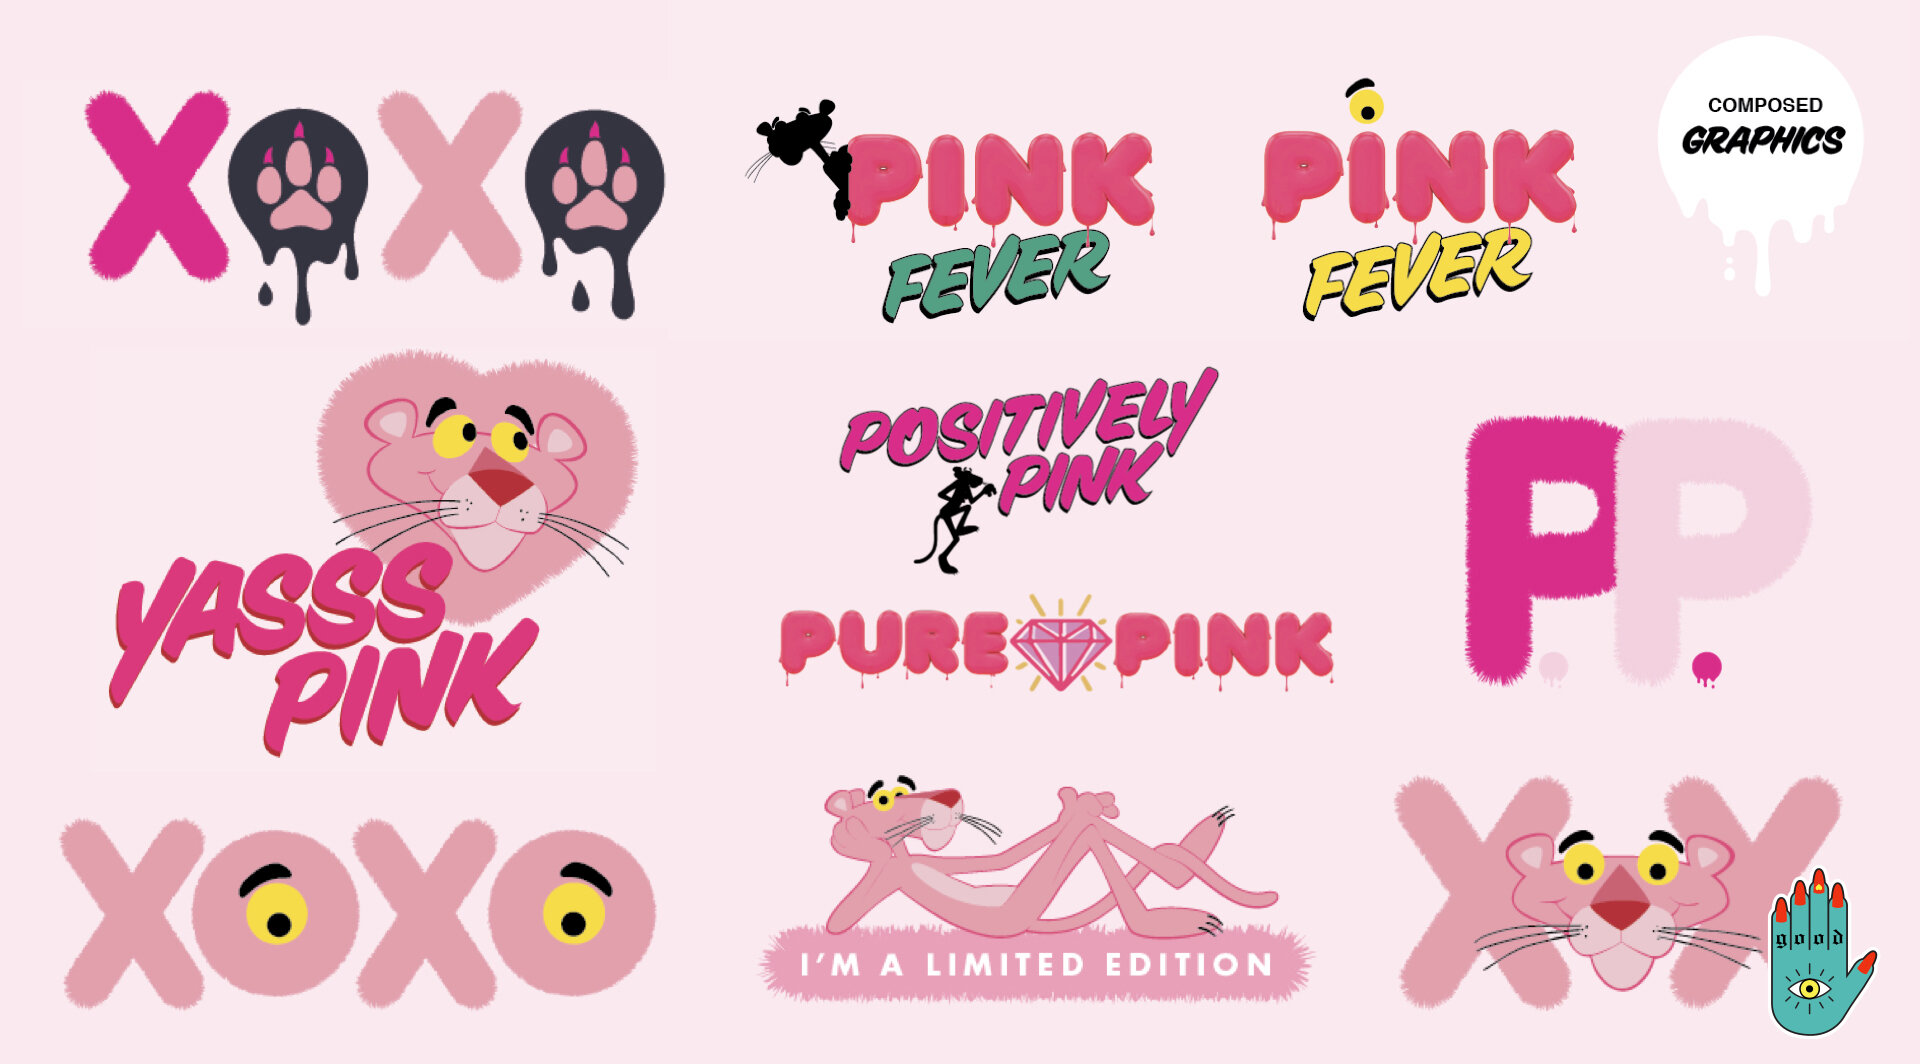 PINK PANTHER — GOOD ALL DAY COLLECTIVE / experiential marketing + love